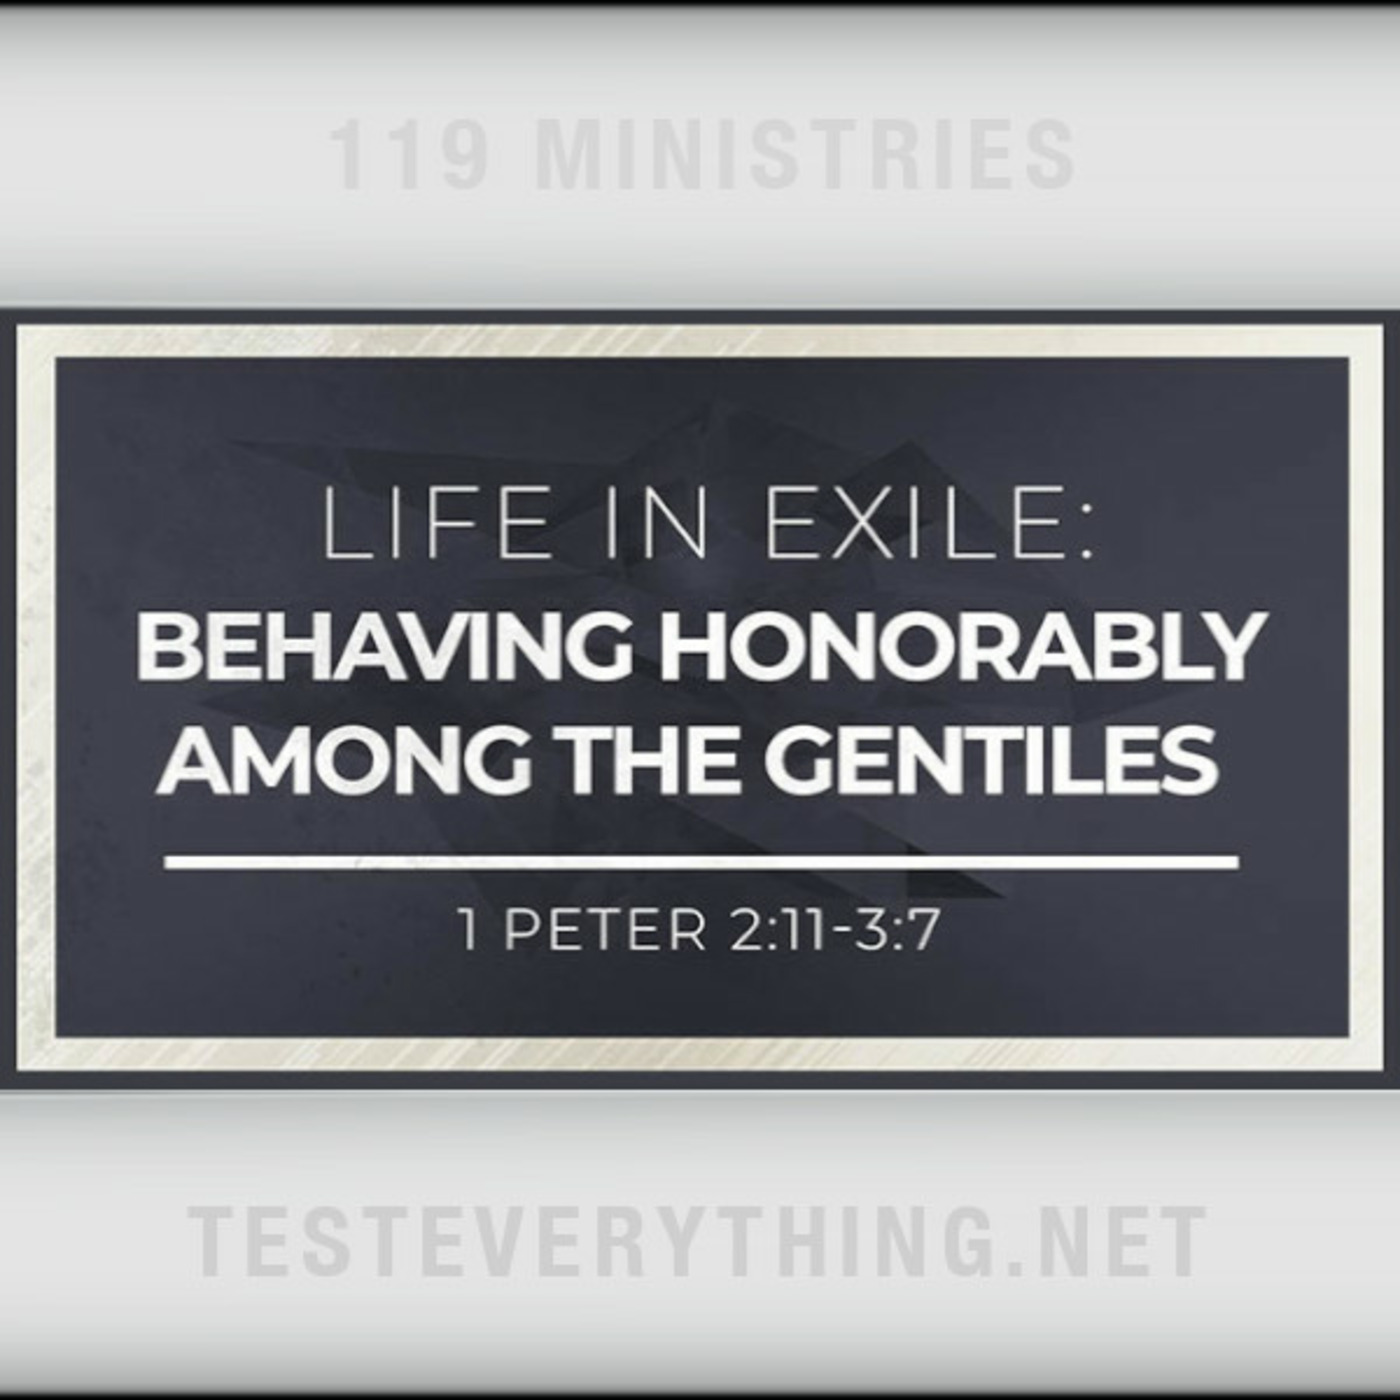 Episode 538: BS: Life in Exile - Behaving Honorably Among the Gentiles (1 Peter 2:11-3:7)